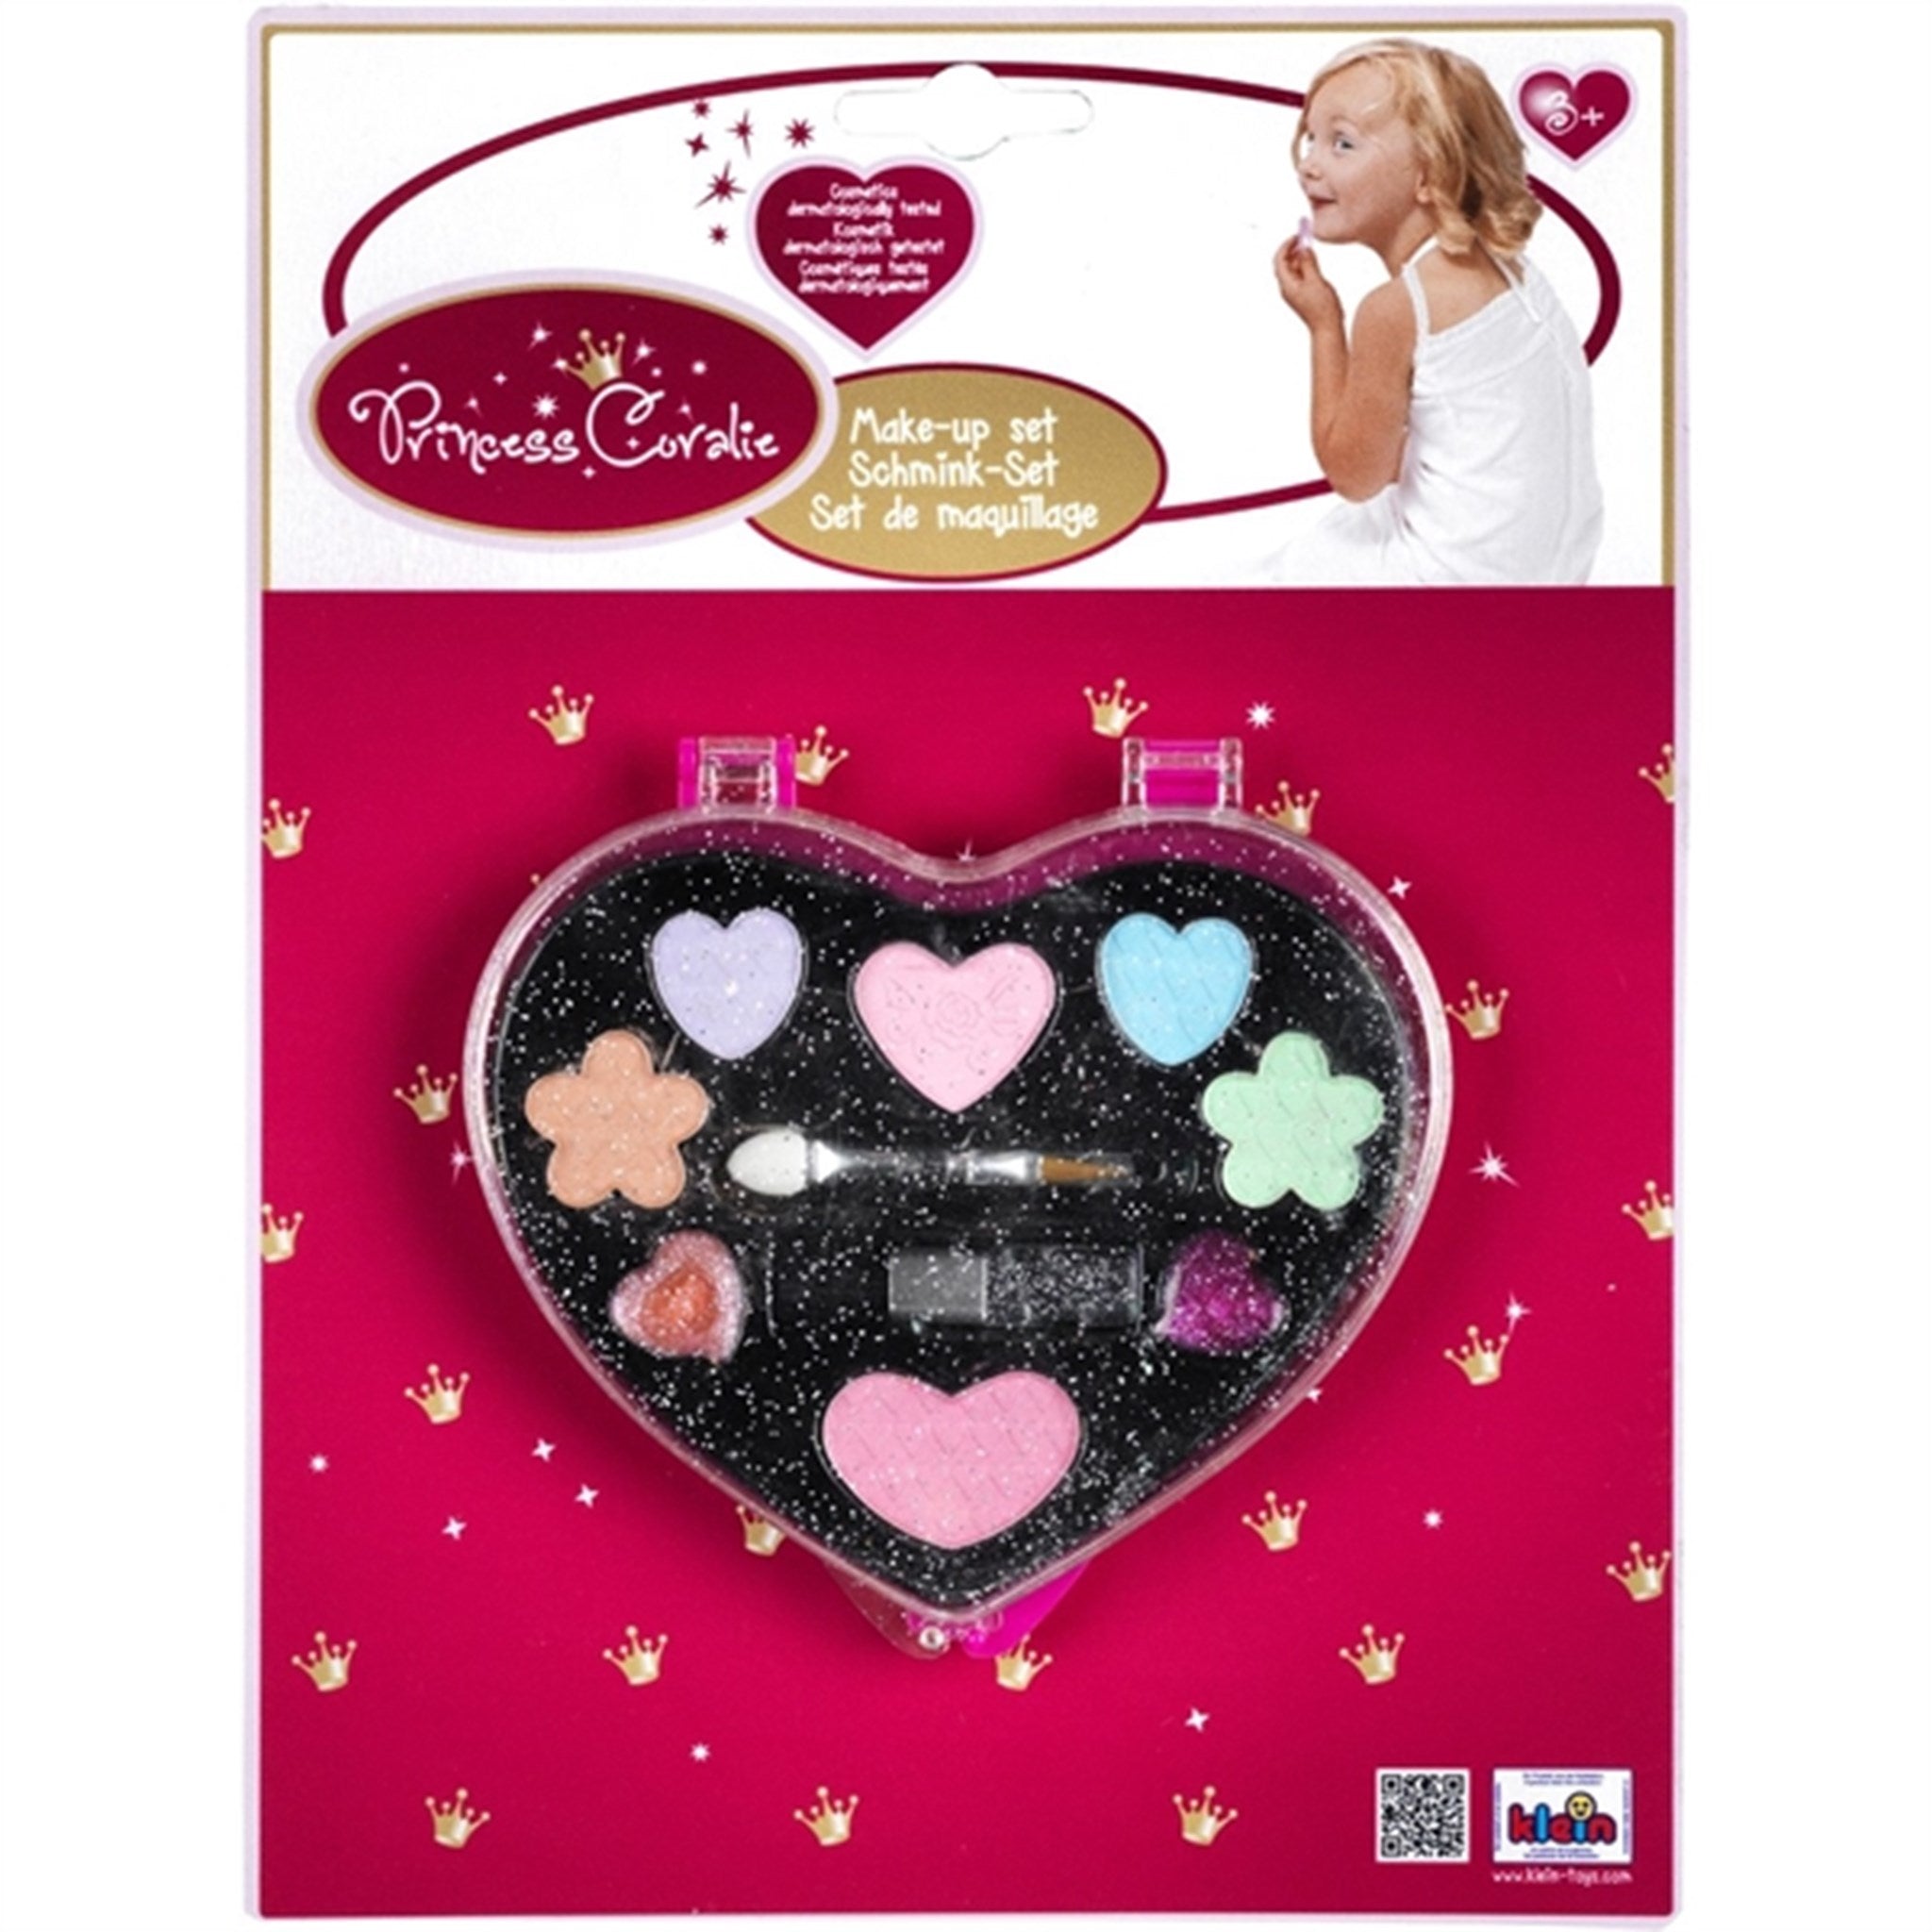 Klein Makeup set in Heart-shaped Box 2